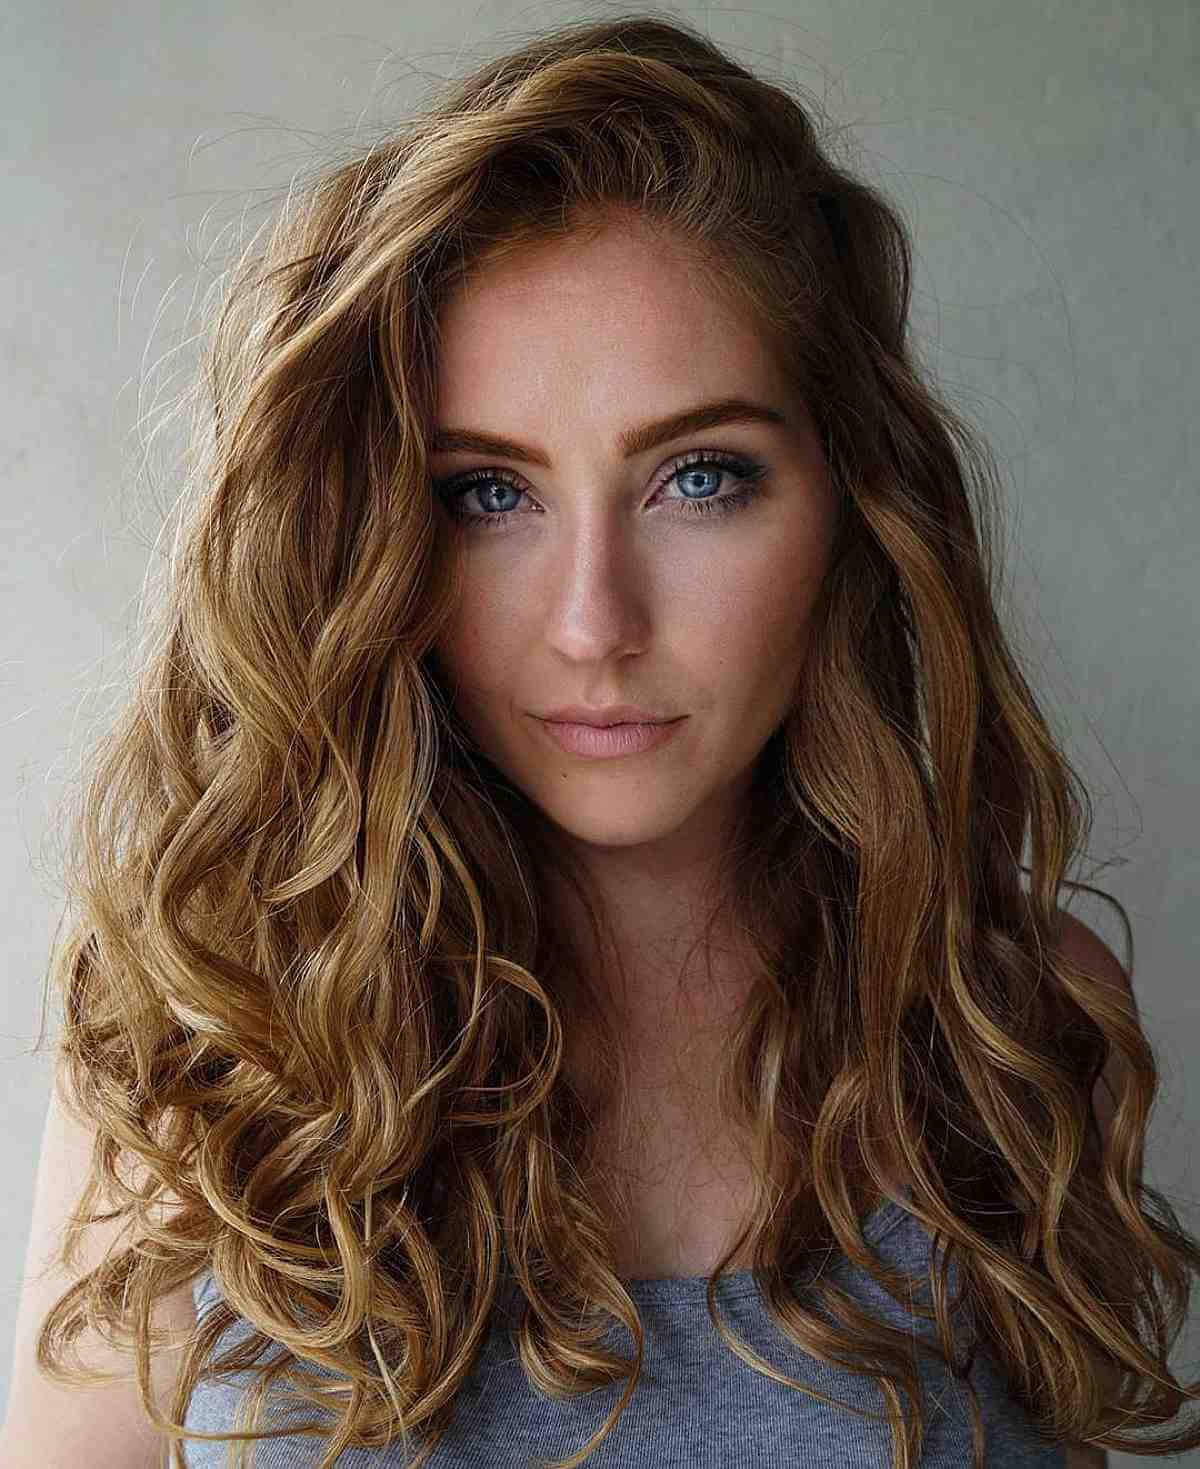 Naturally Curly Medium-Length Hair with a Deep Side Part